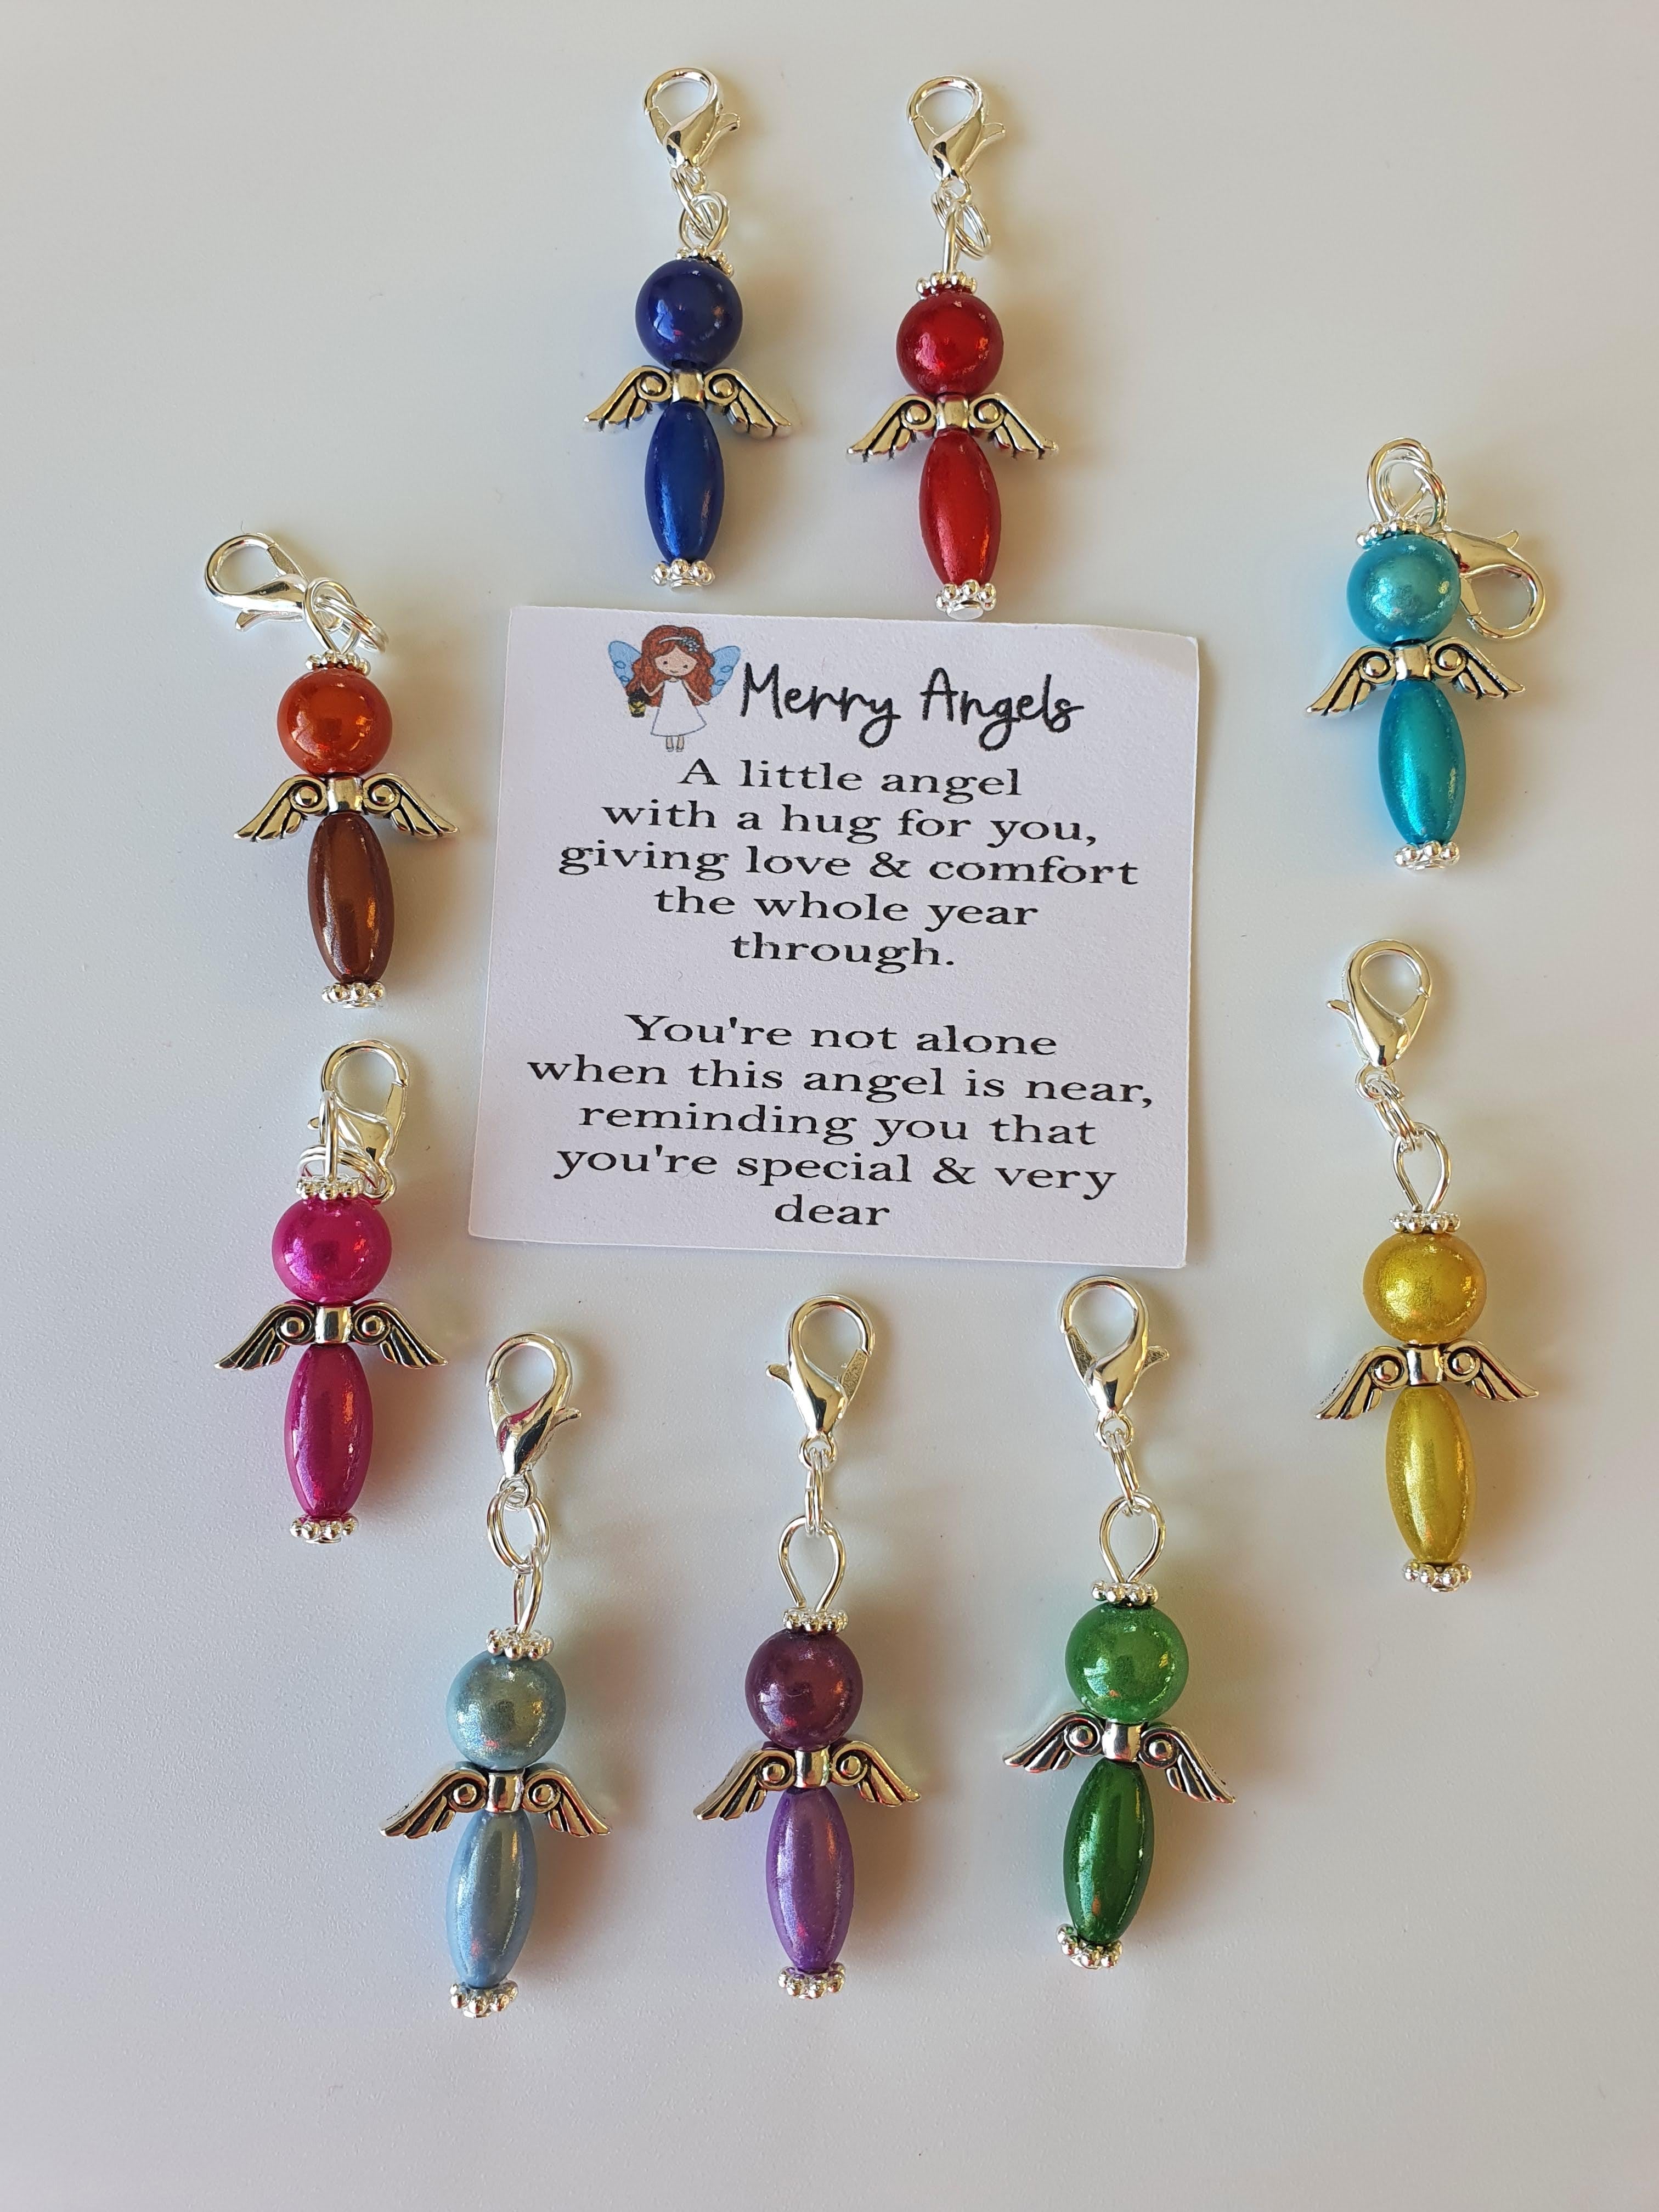 This is a picture of 9 angel hugs laid out around a poem about angels. The angel hugs are in a variety of colours including: blue, red, yellow, green, purple, pink 